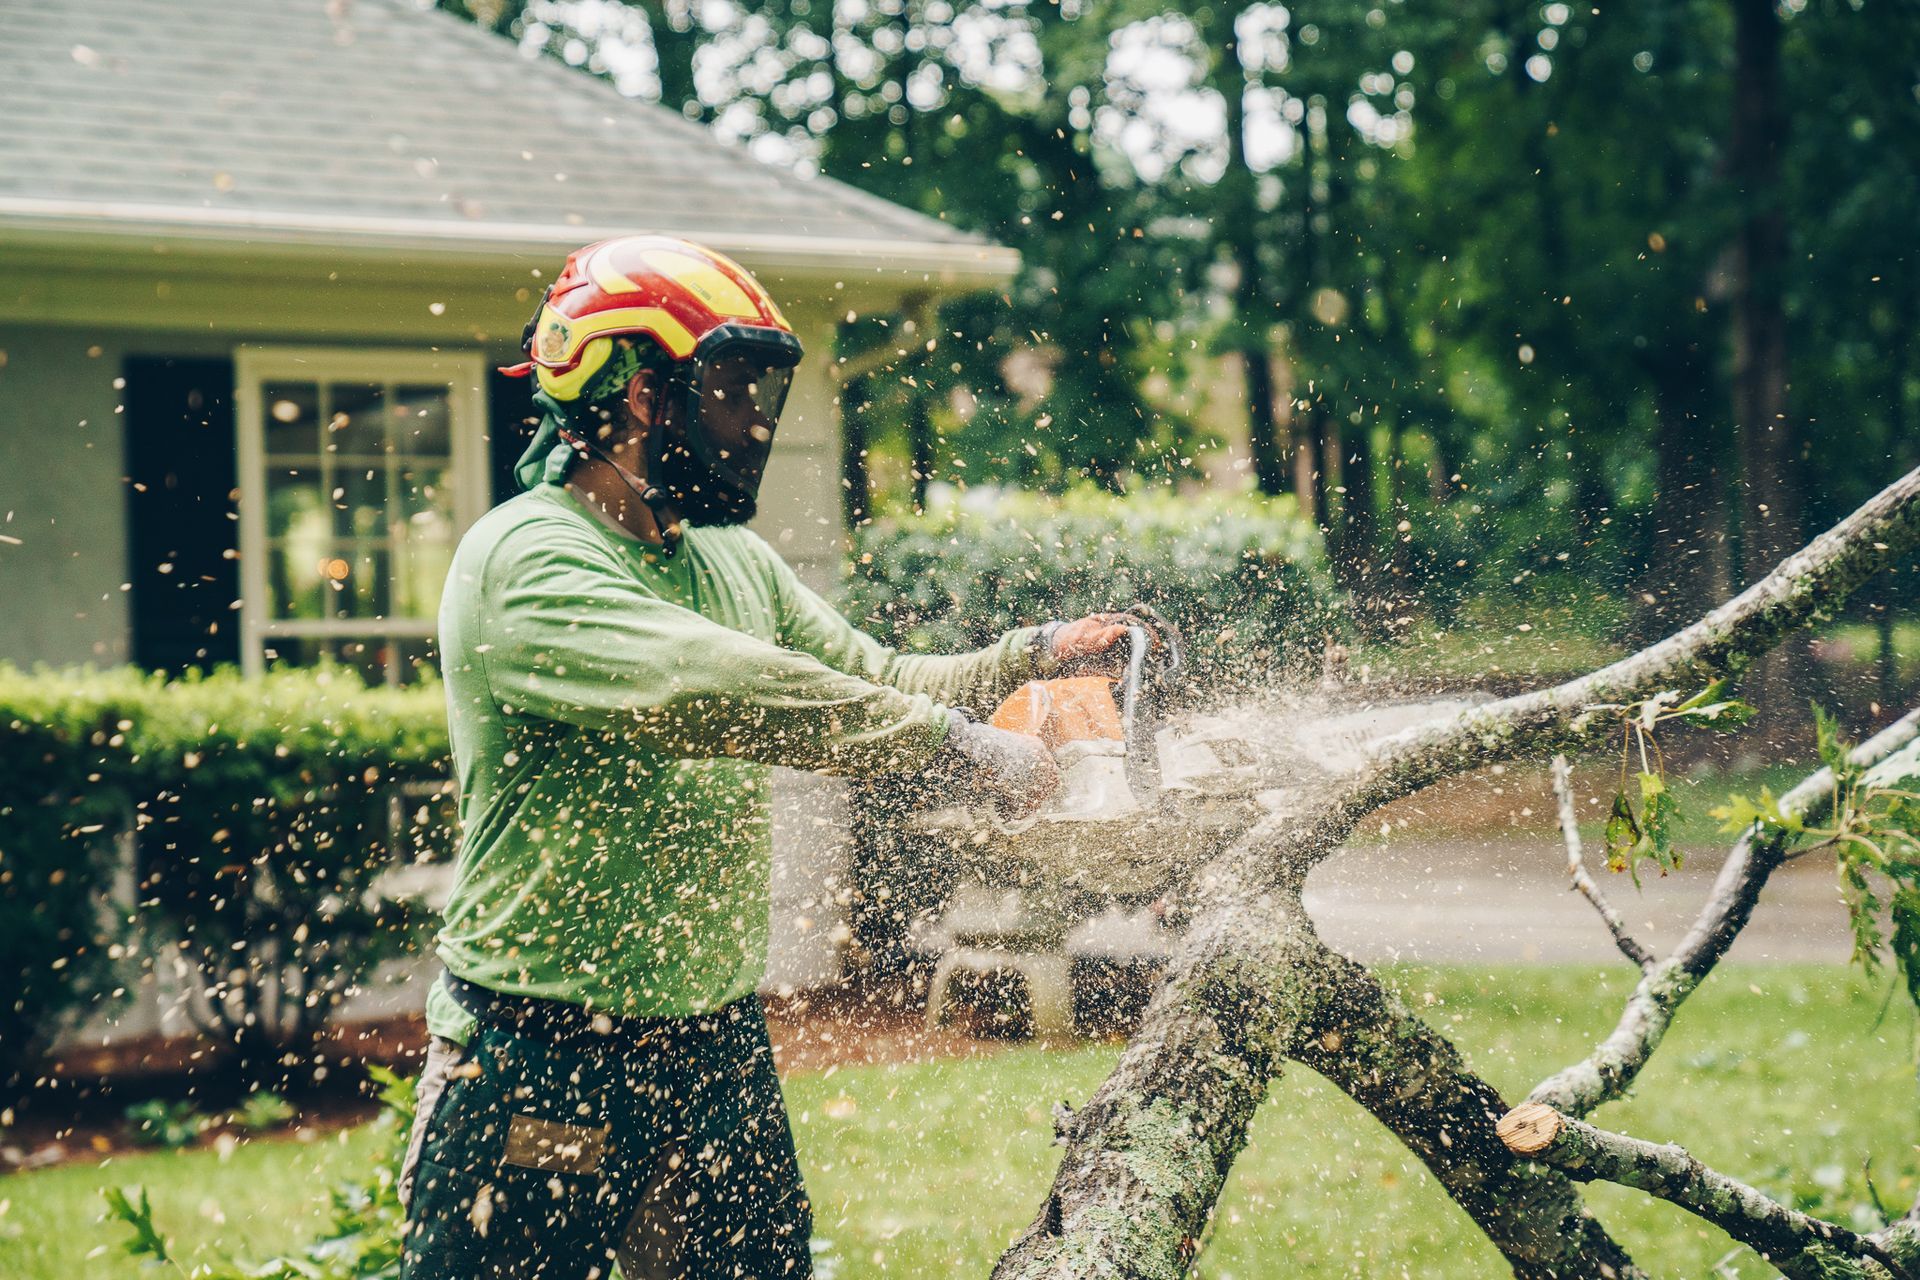 a man wearing a helmet is cutting a tree branch with a chainsaw